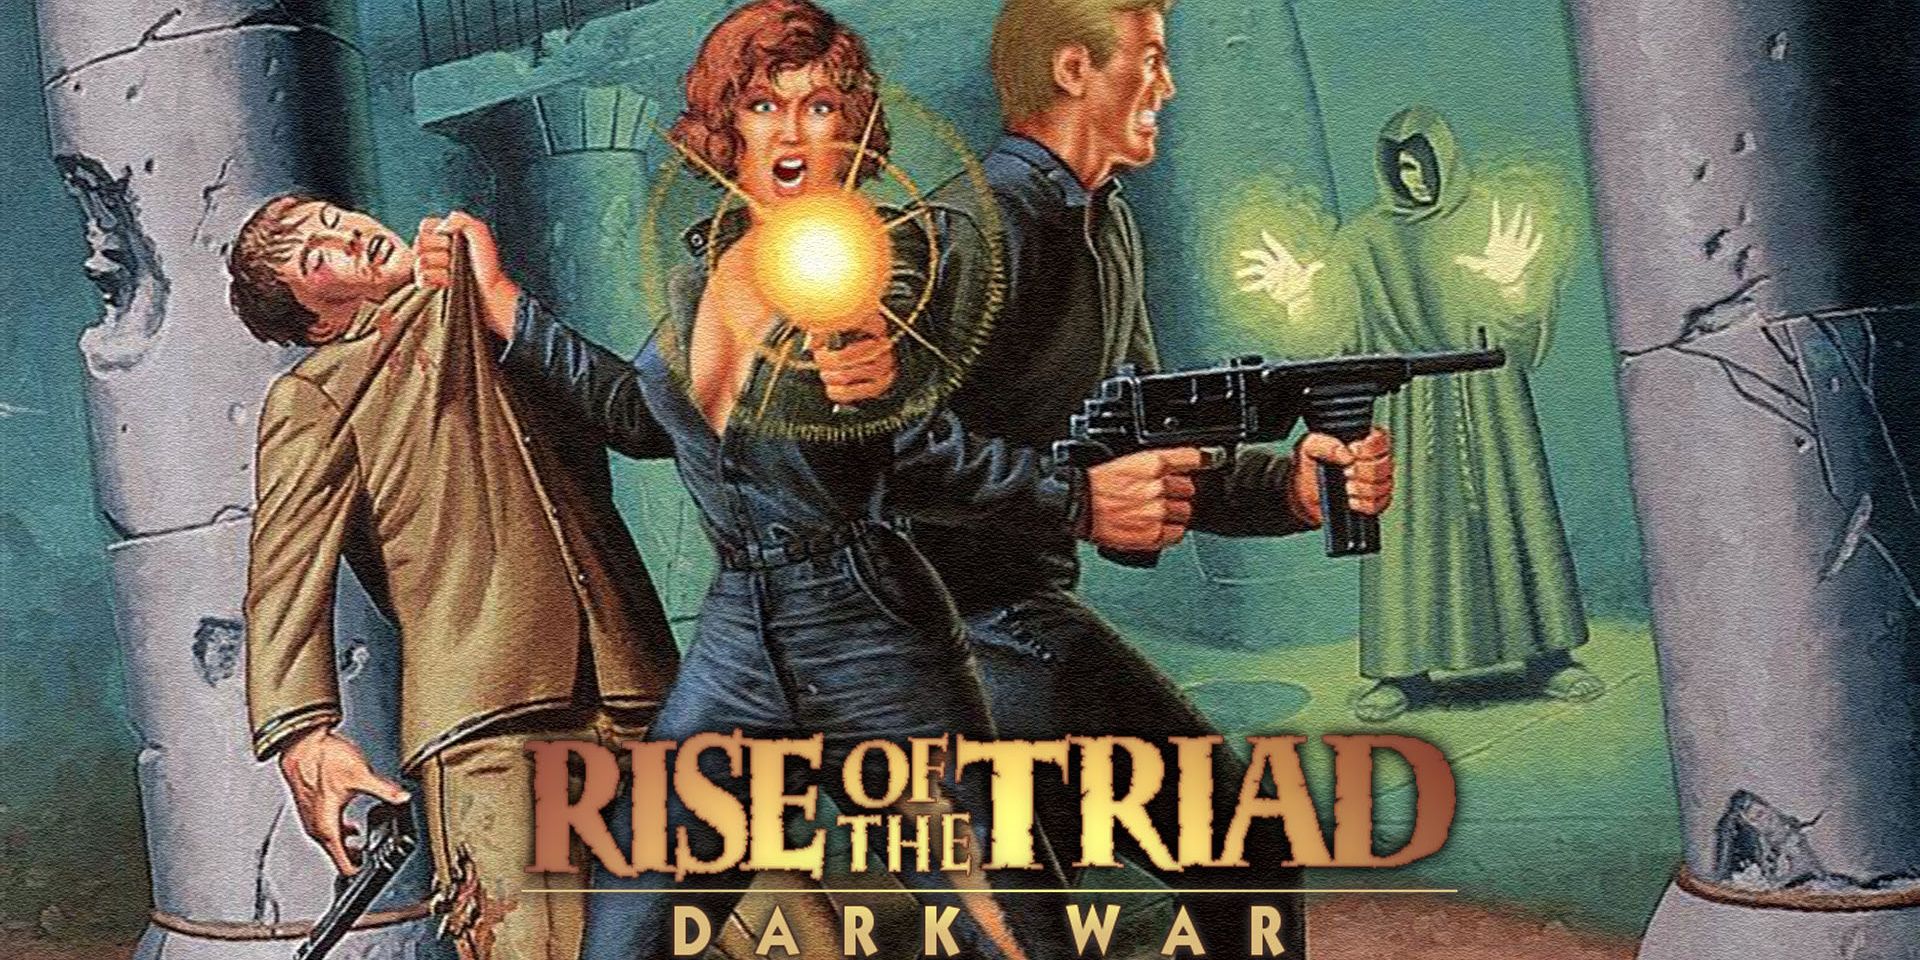 the cover art for Rise Of The Triads